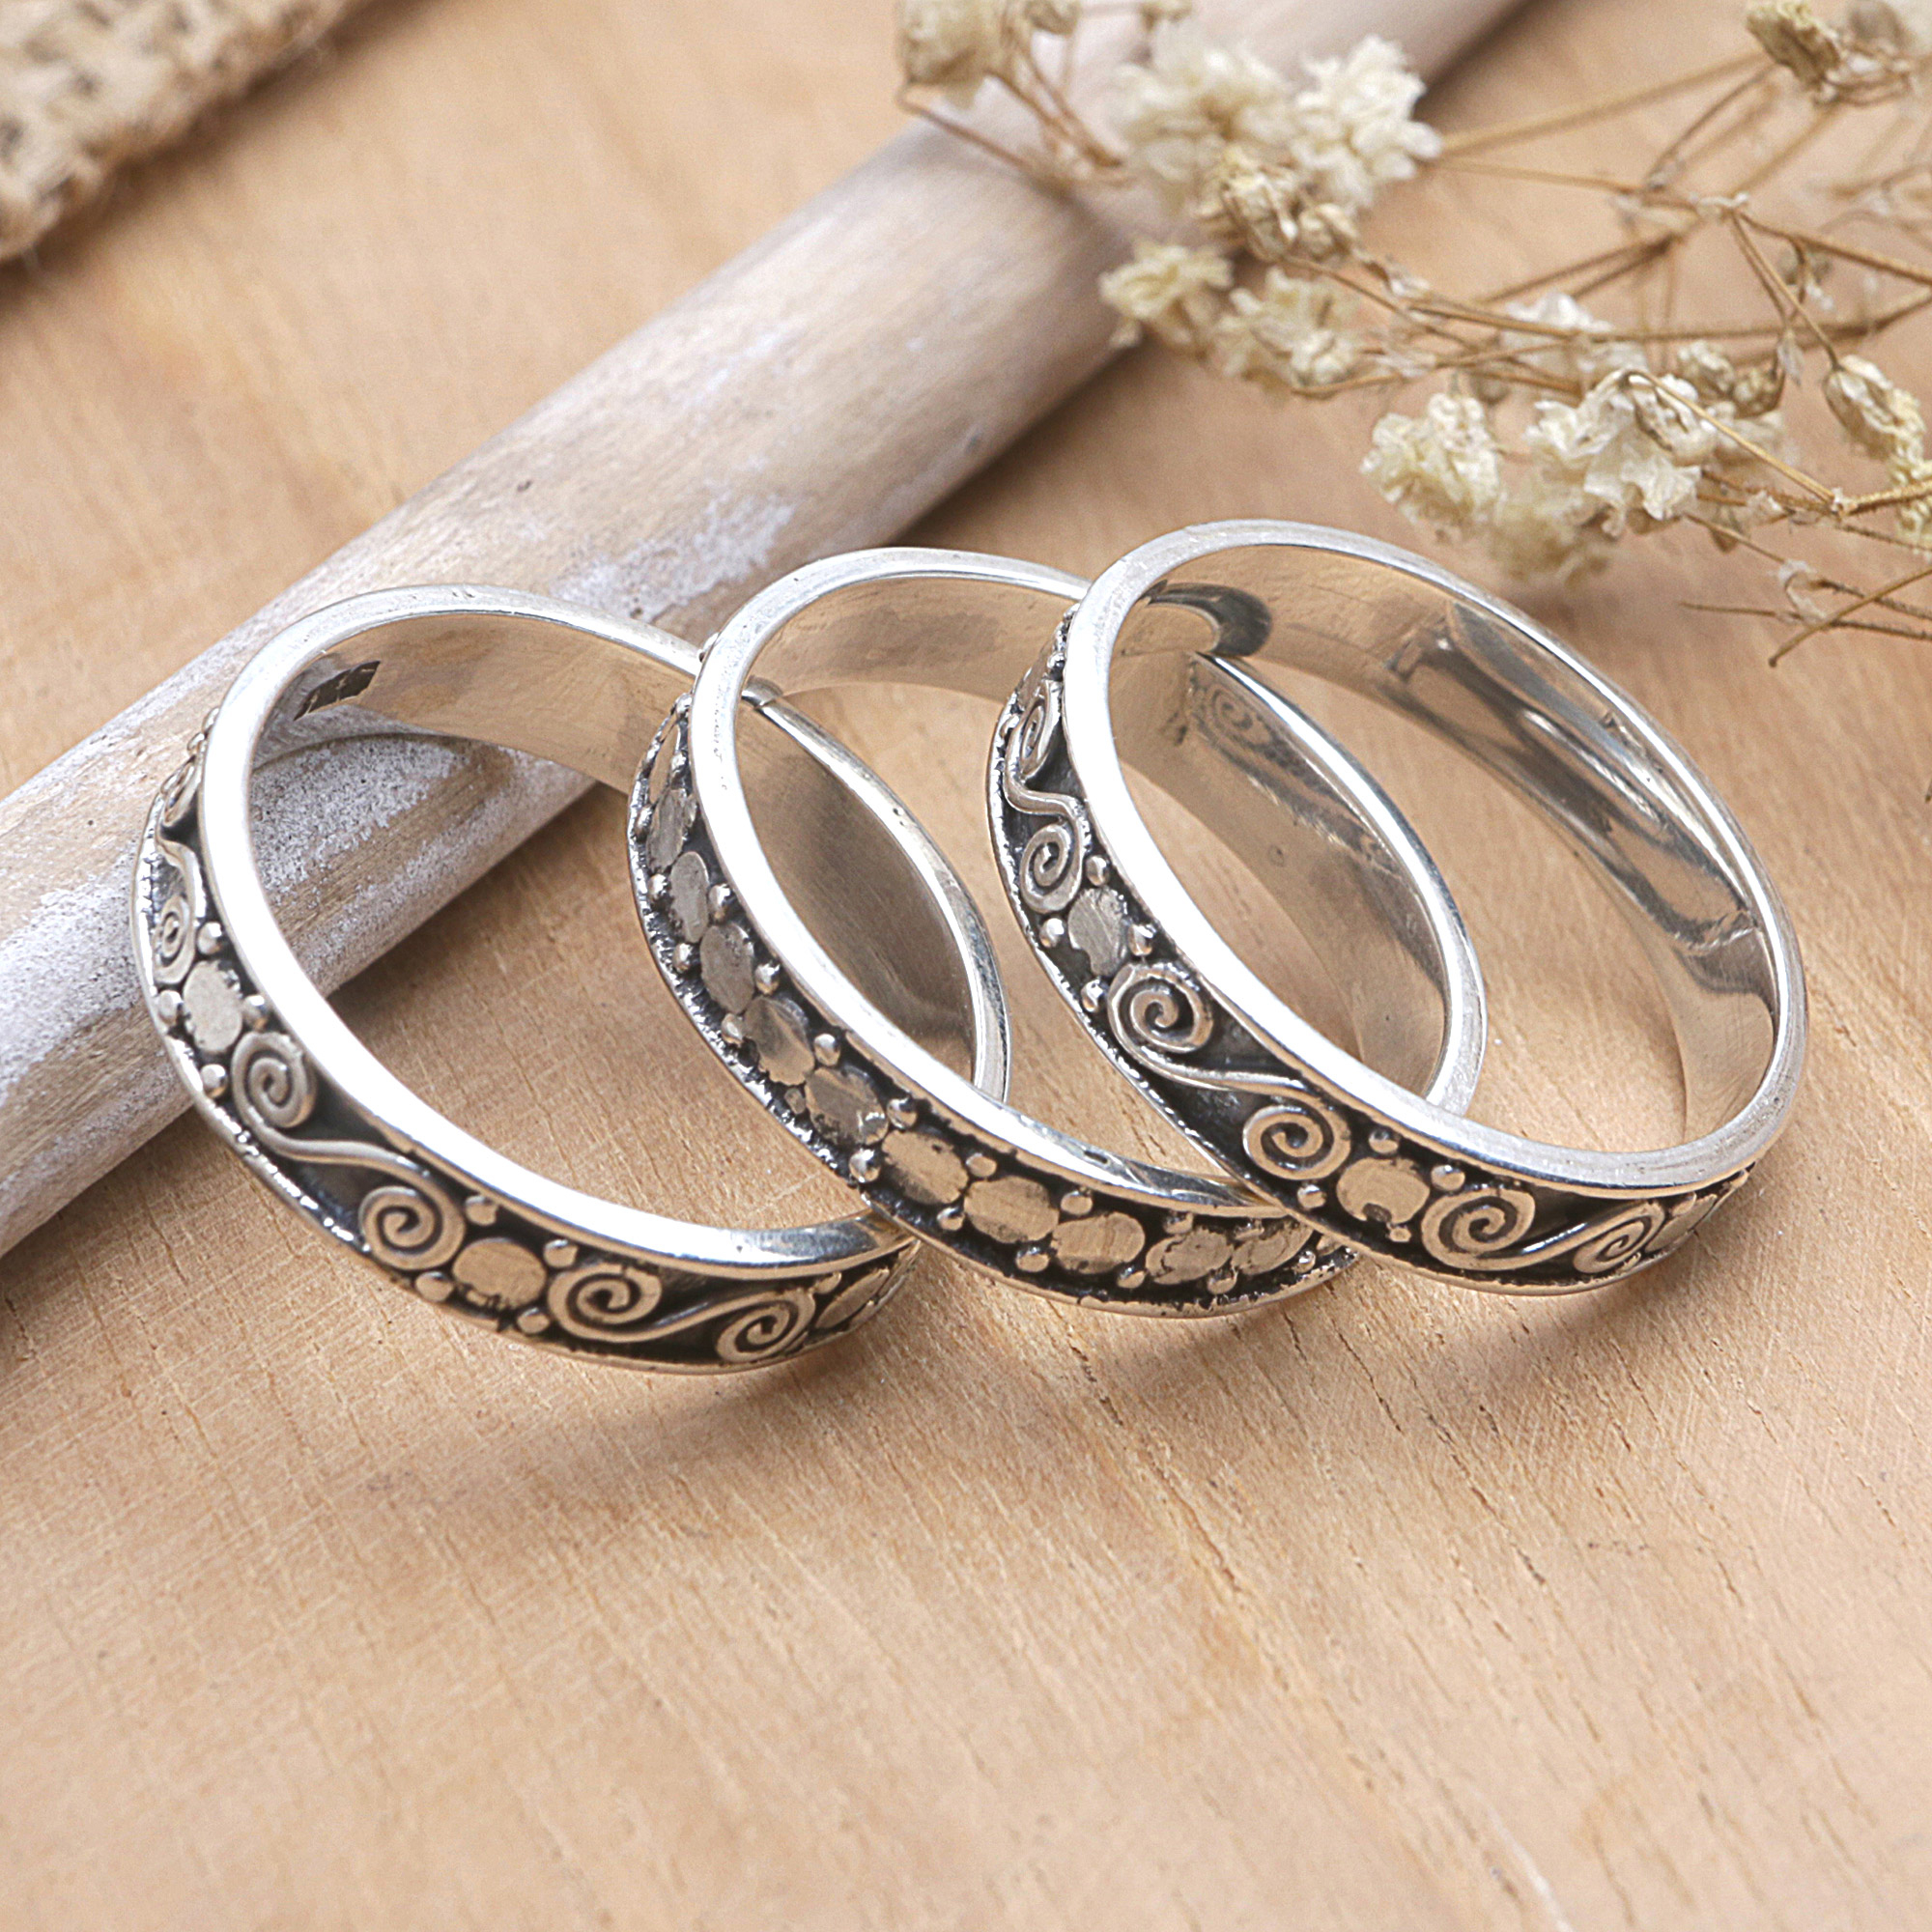 Set of Three 925 Sterling Silver Stack Rings